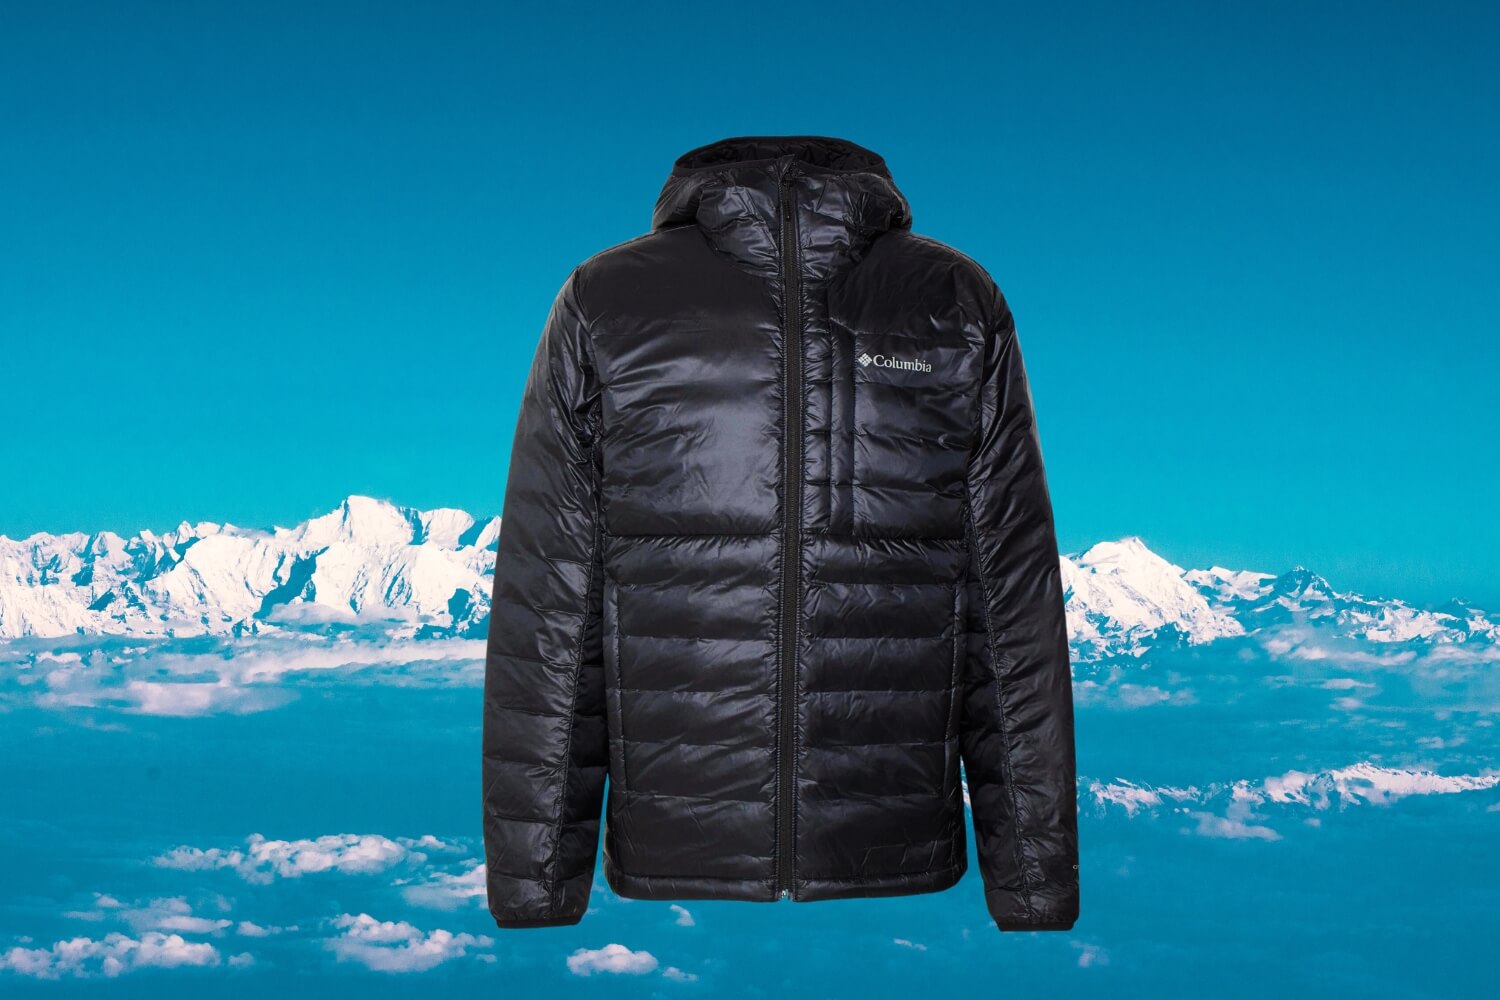 FOR SHORT WALKS: COLUMBIA INFINITY DOUBLE WALL DOWN JACKET